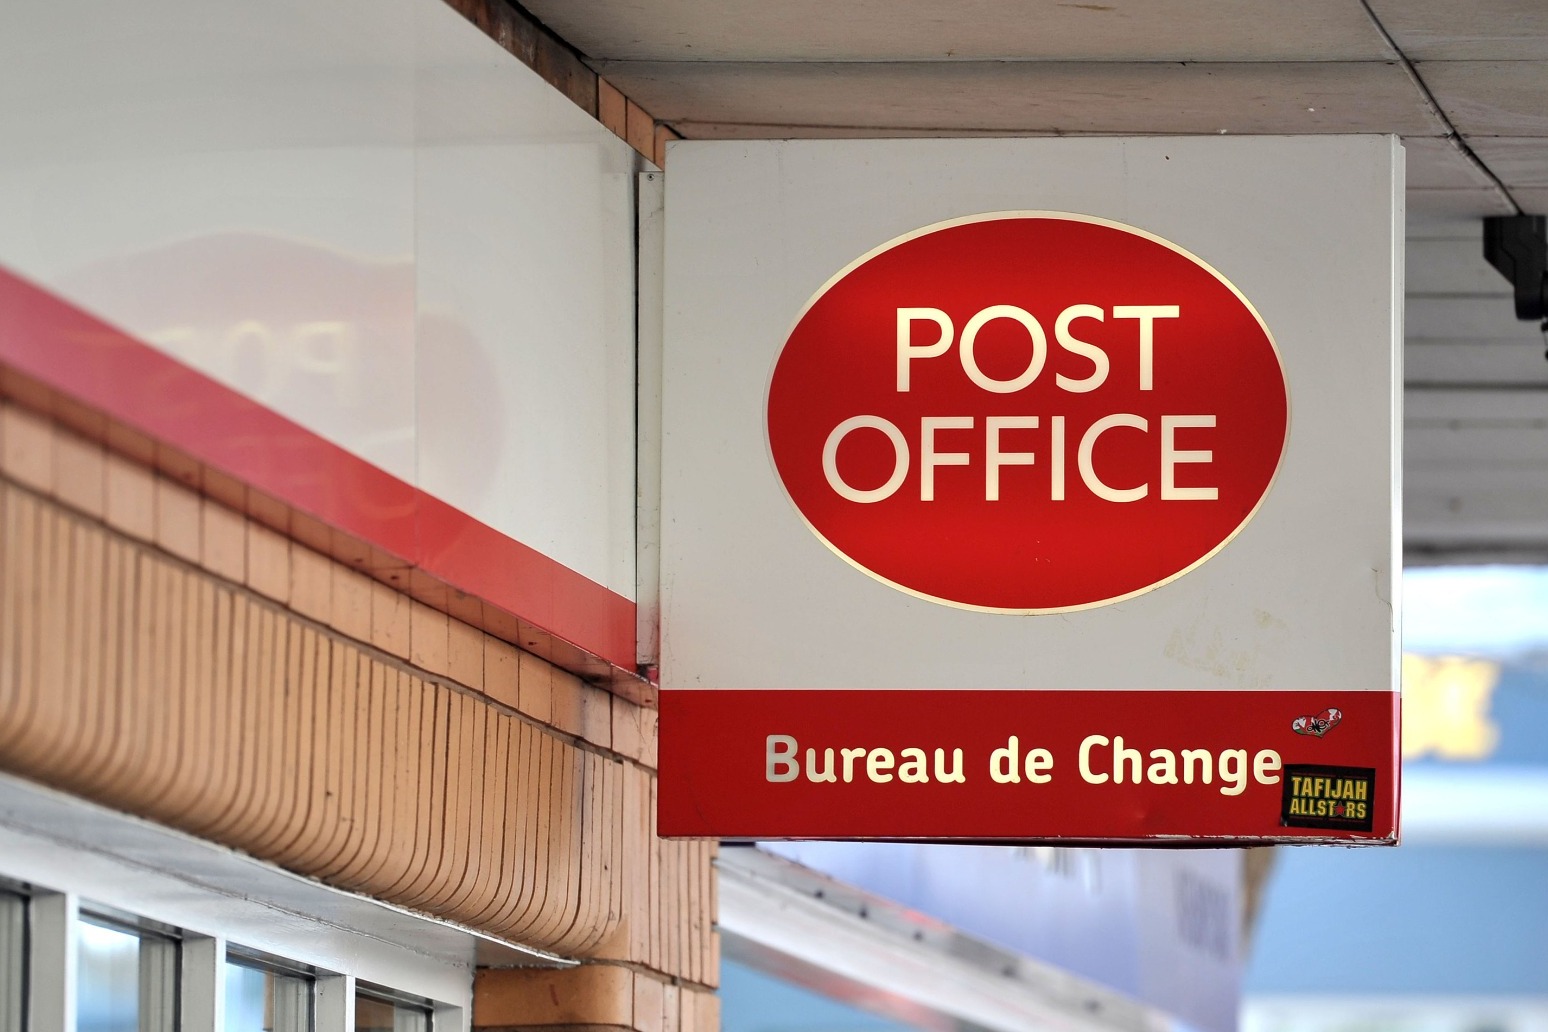 Post Office workers staging 24 hour strike in pay row